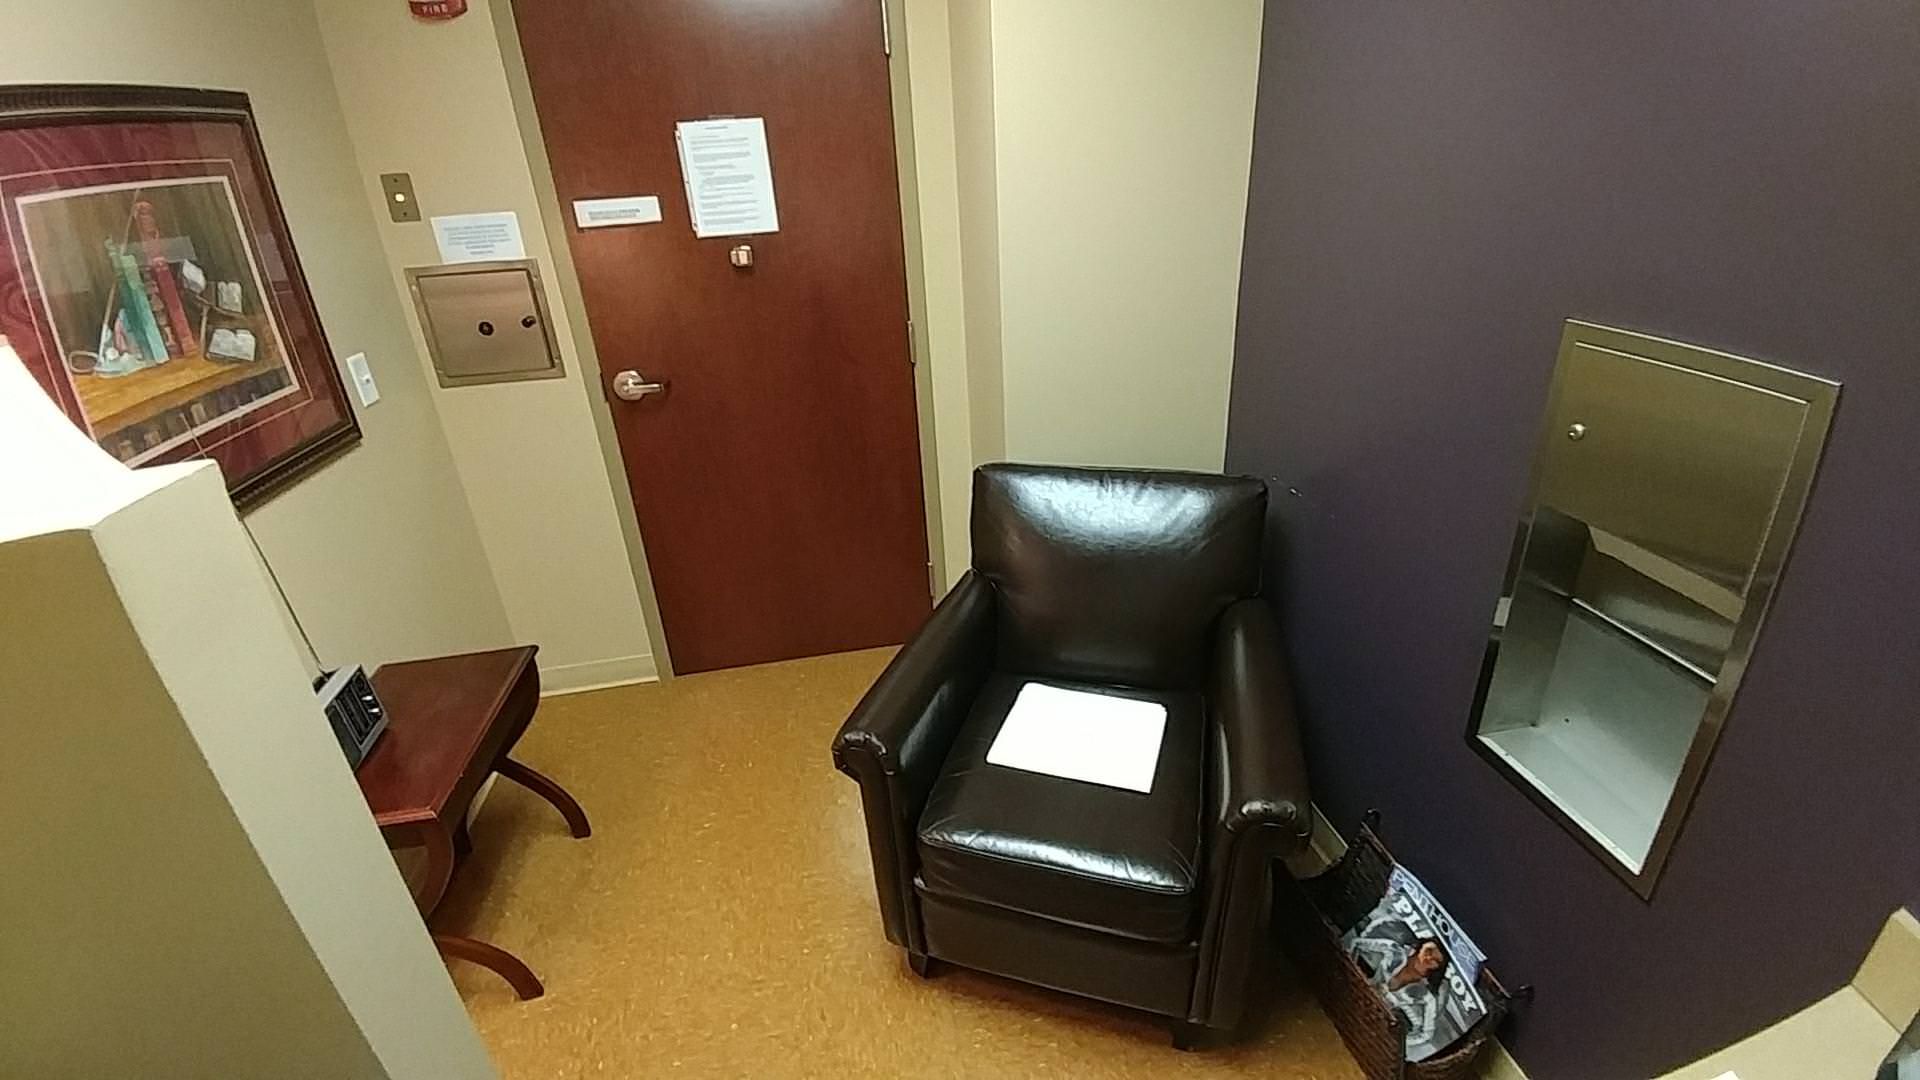 My wife and I are doing fertility treatments. Today I had to provide a sperm sample. Here's the super erotic not awkward room where you jack off into a cup with your name on it.